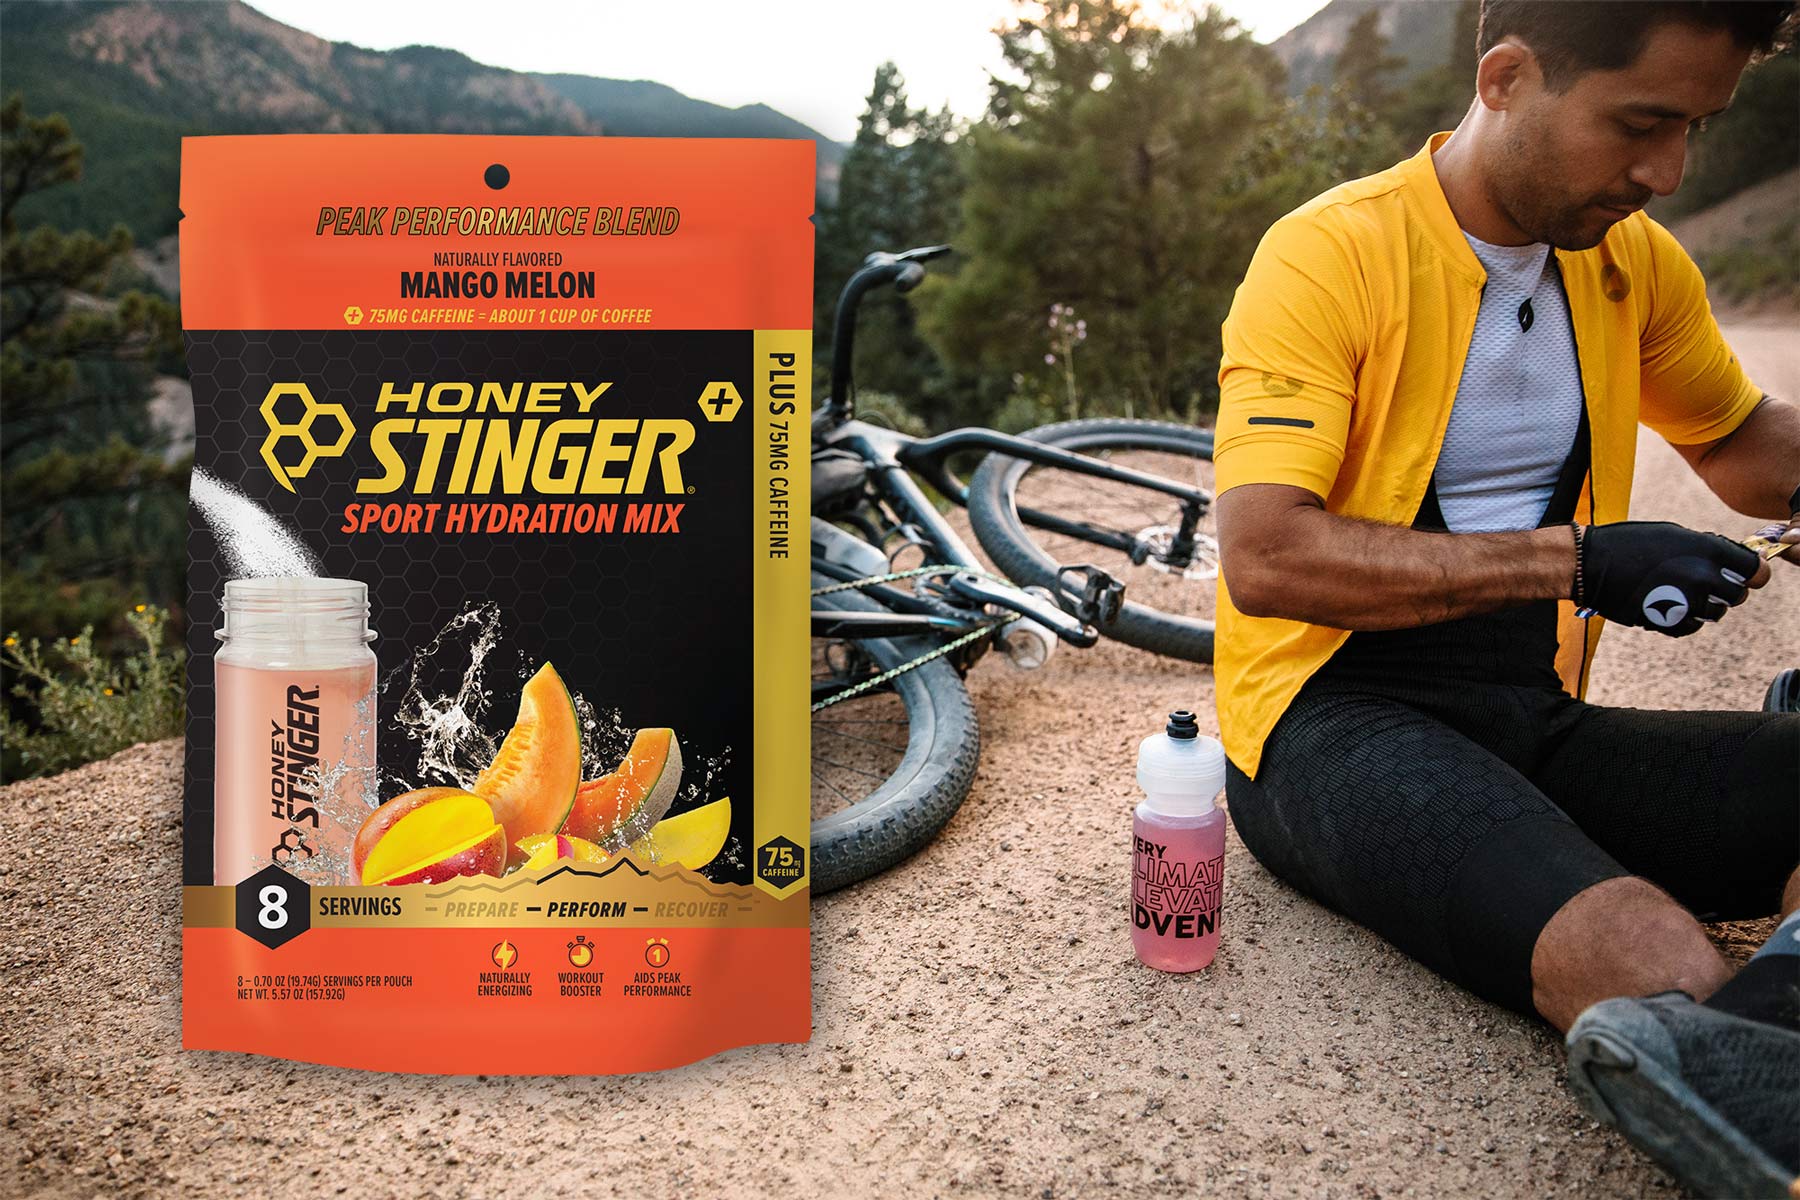 honey stinger sports drink mix shown with a cyclist